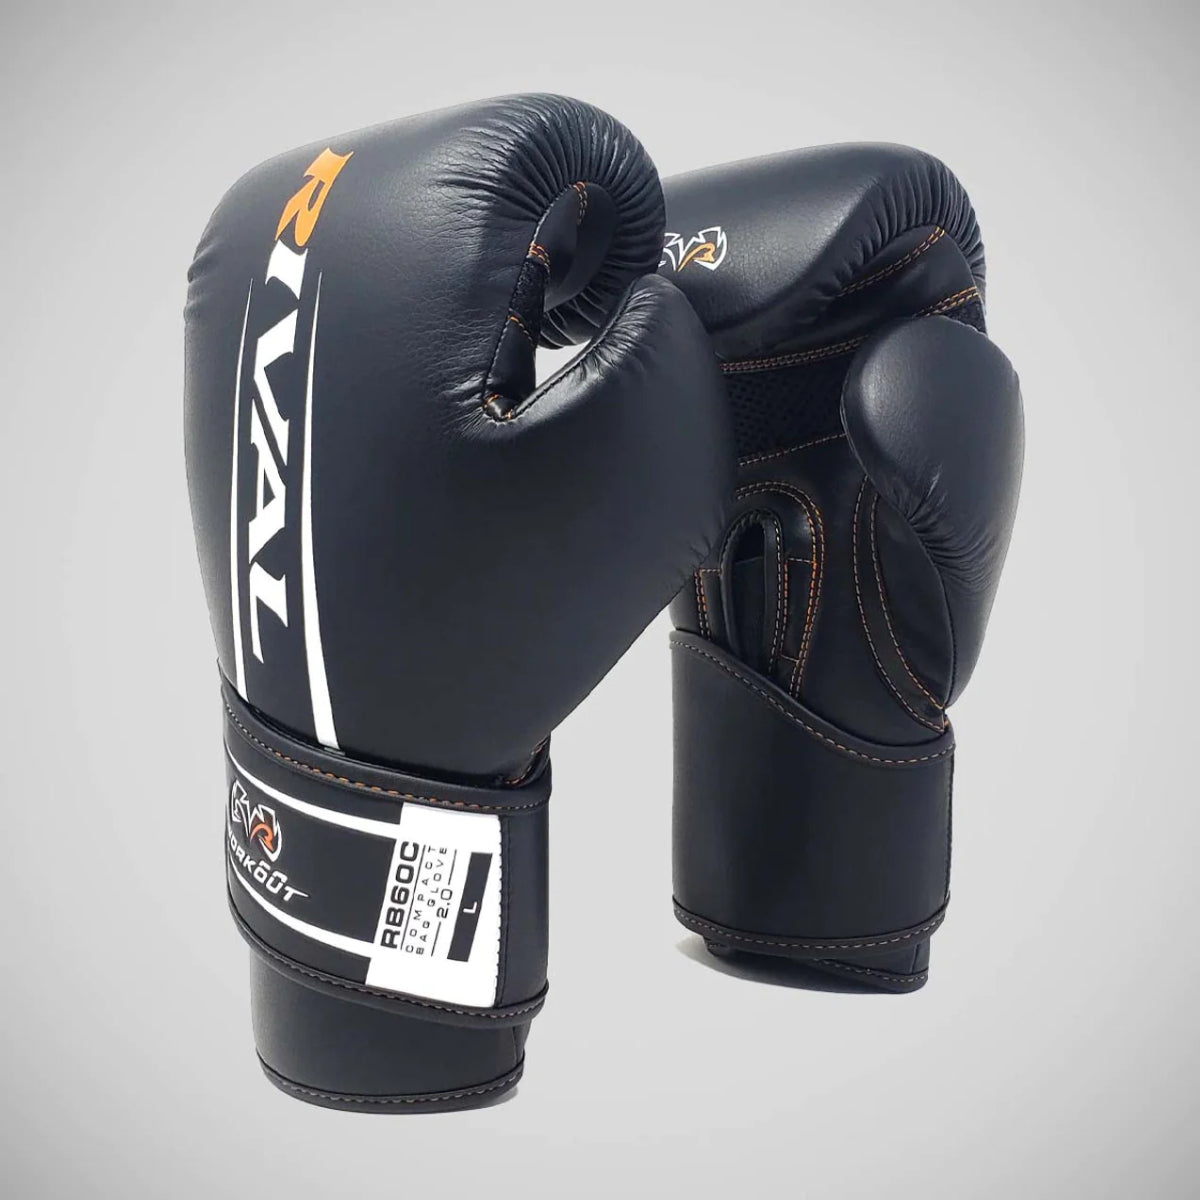 Rival RB60C Workout Compact 2.0 Bag Gloves - Fight Co